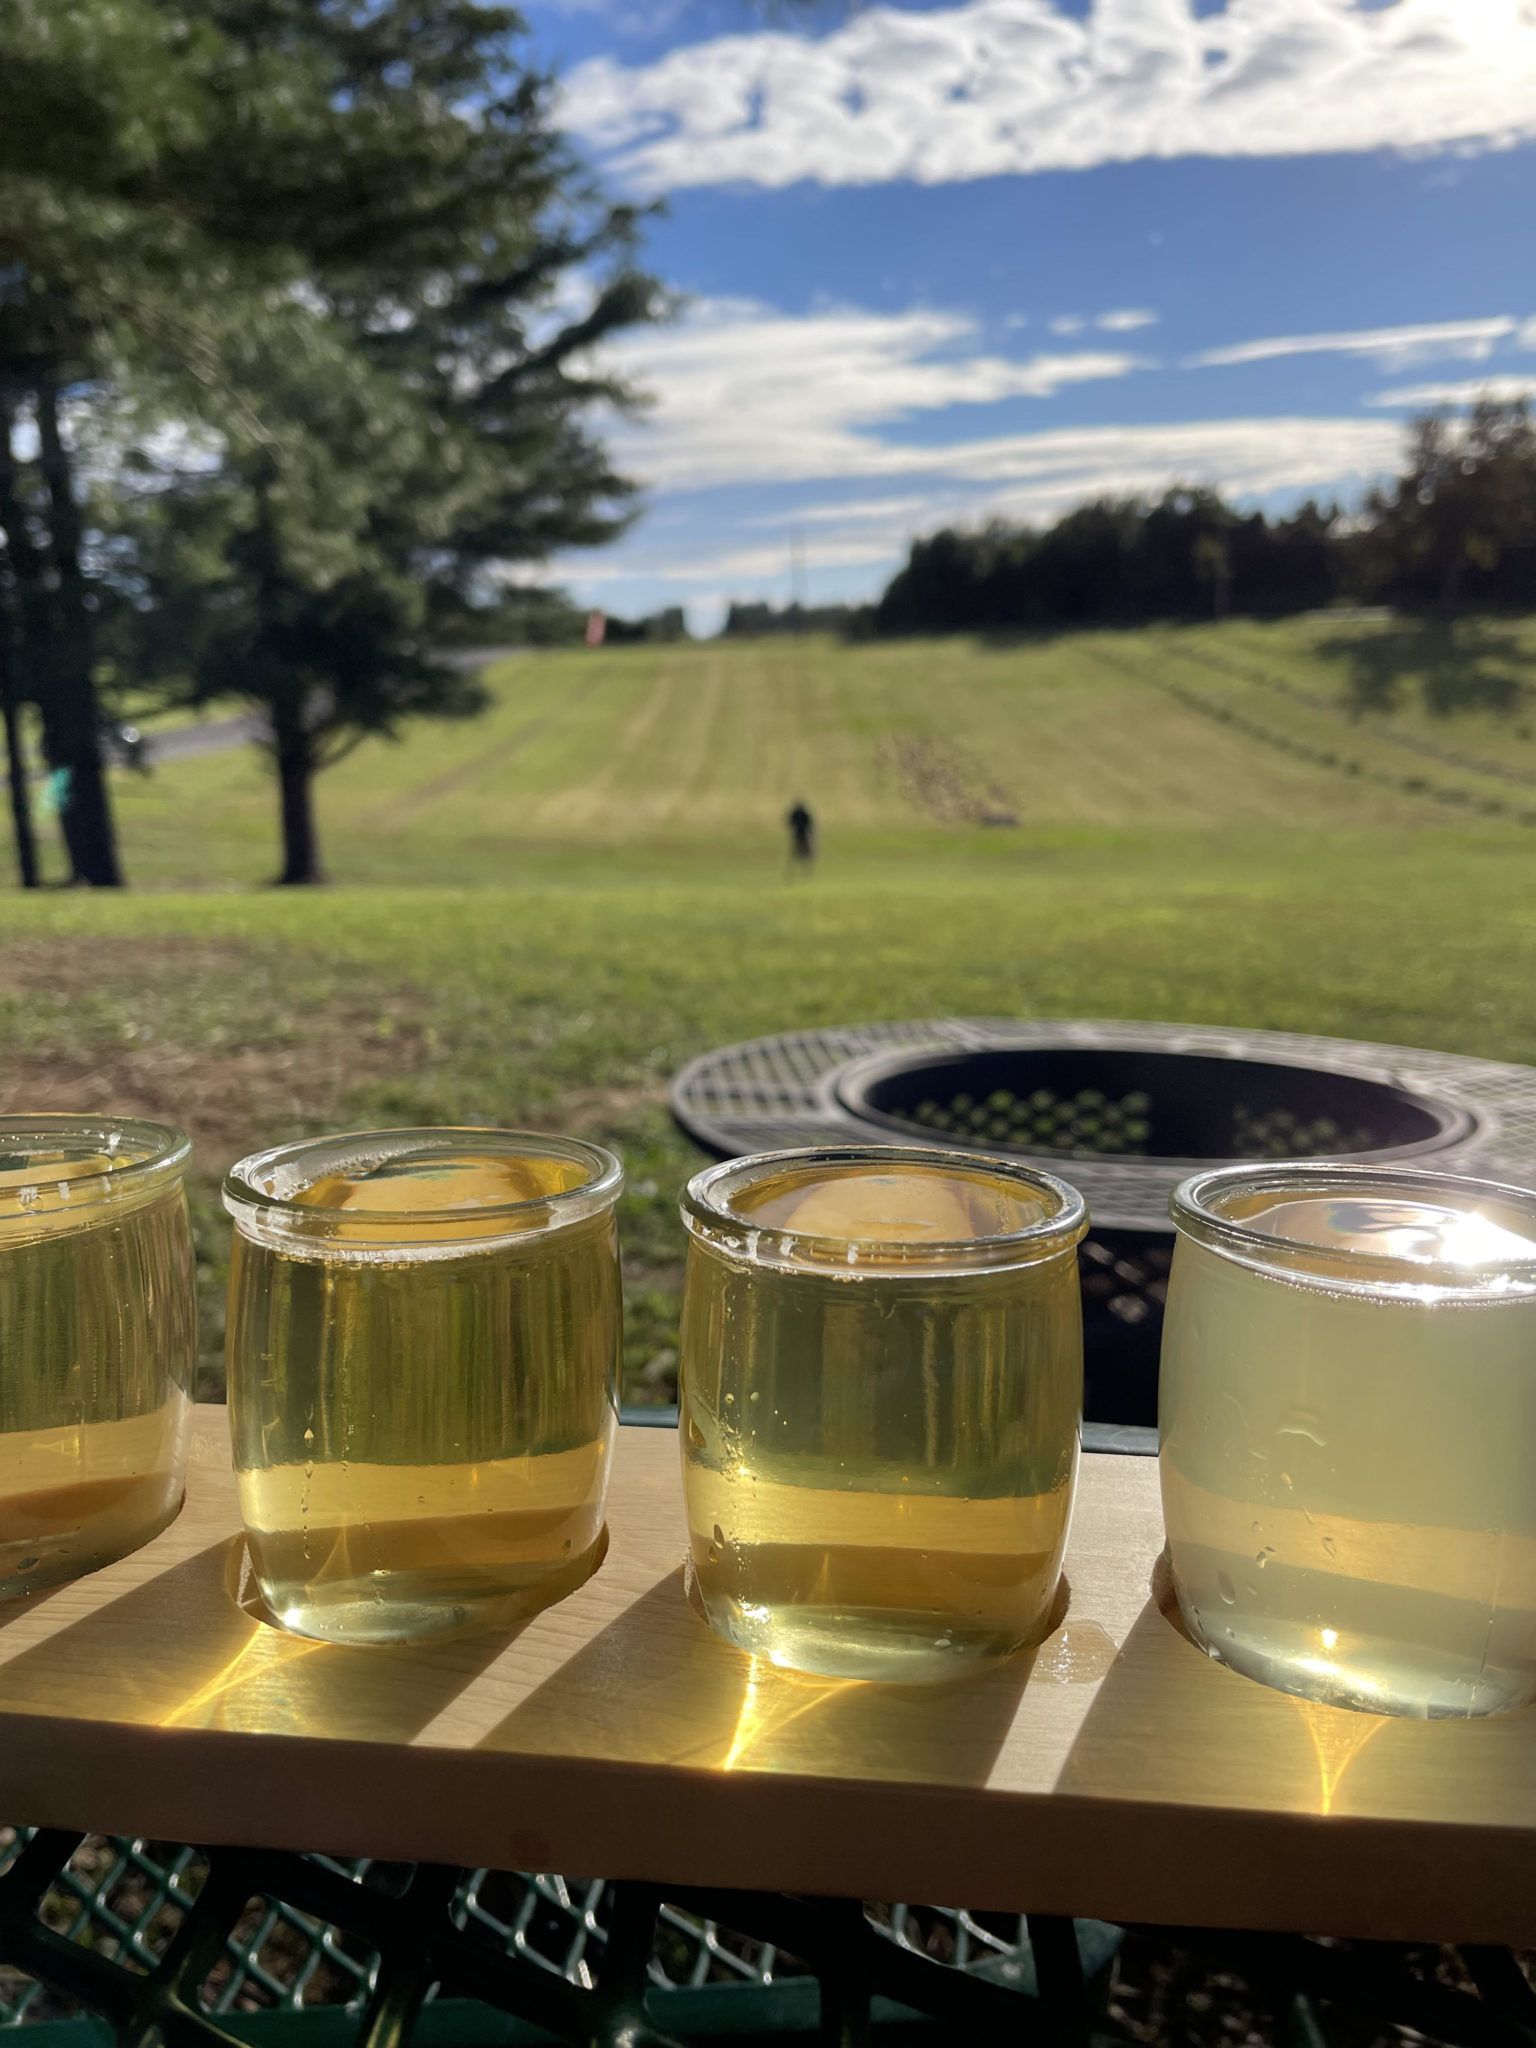 “Along came a cider: 9 1/2 hours touring the makers of an increasingly popular beverage” – Baltimore Fishbowl